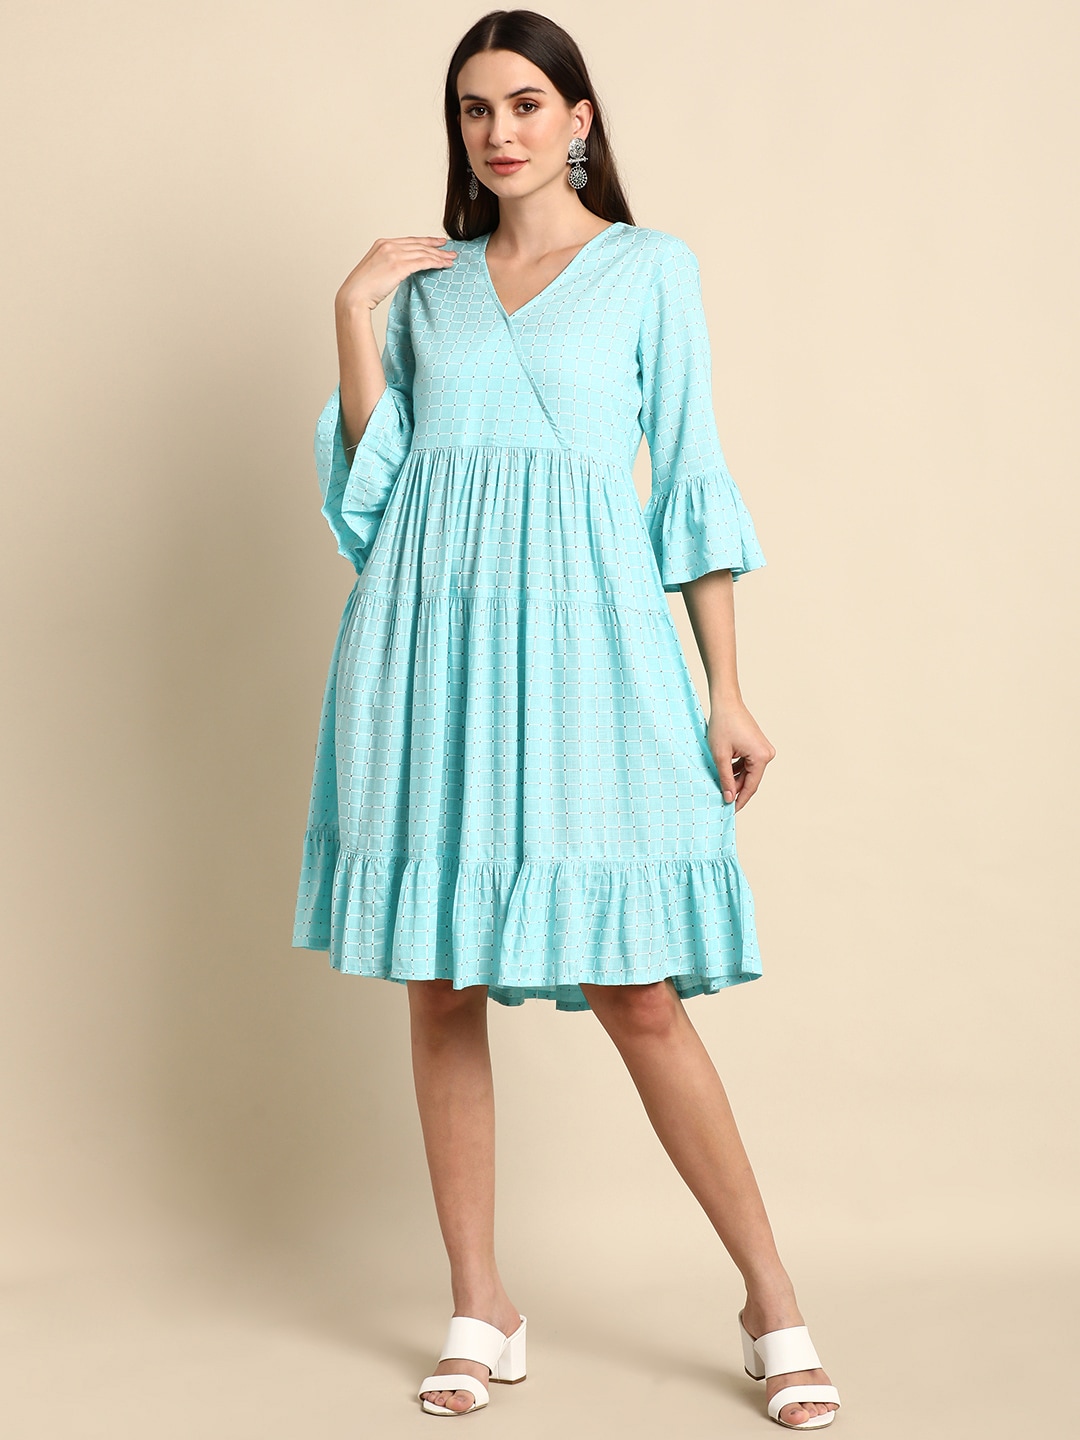 Janasya Turquoise Blue & White Checked Tiered Dress Price in India